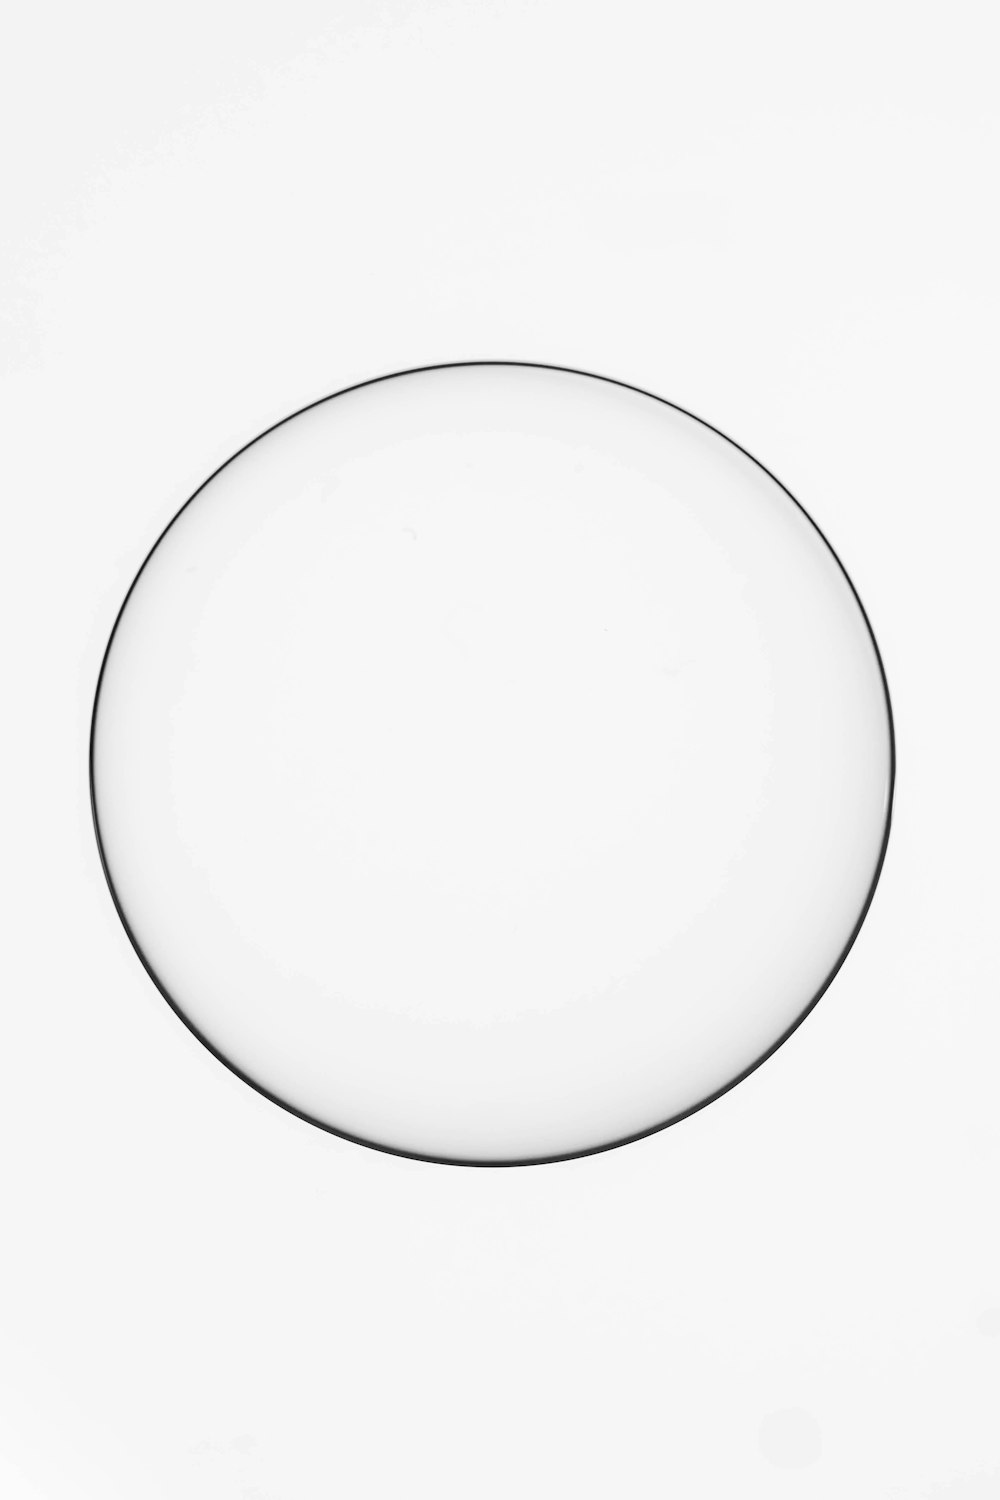 a glass plate sitting on top of a white table